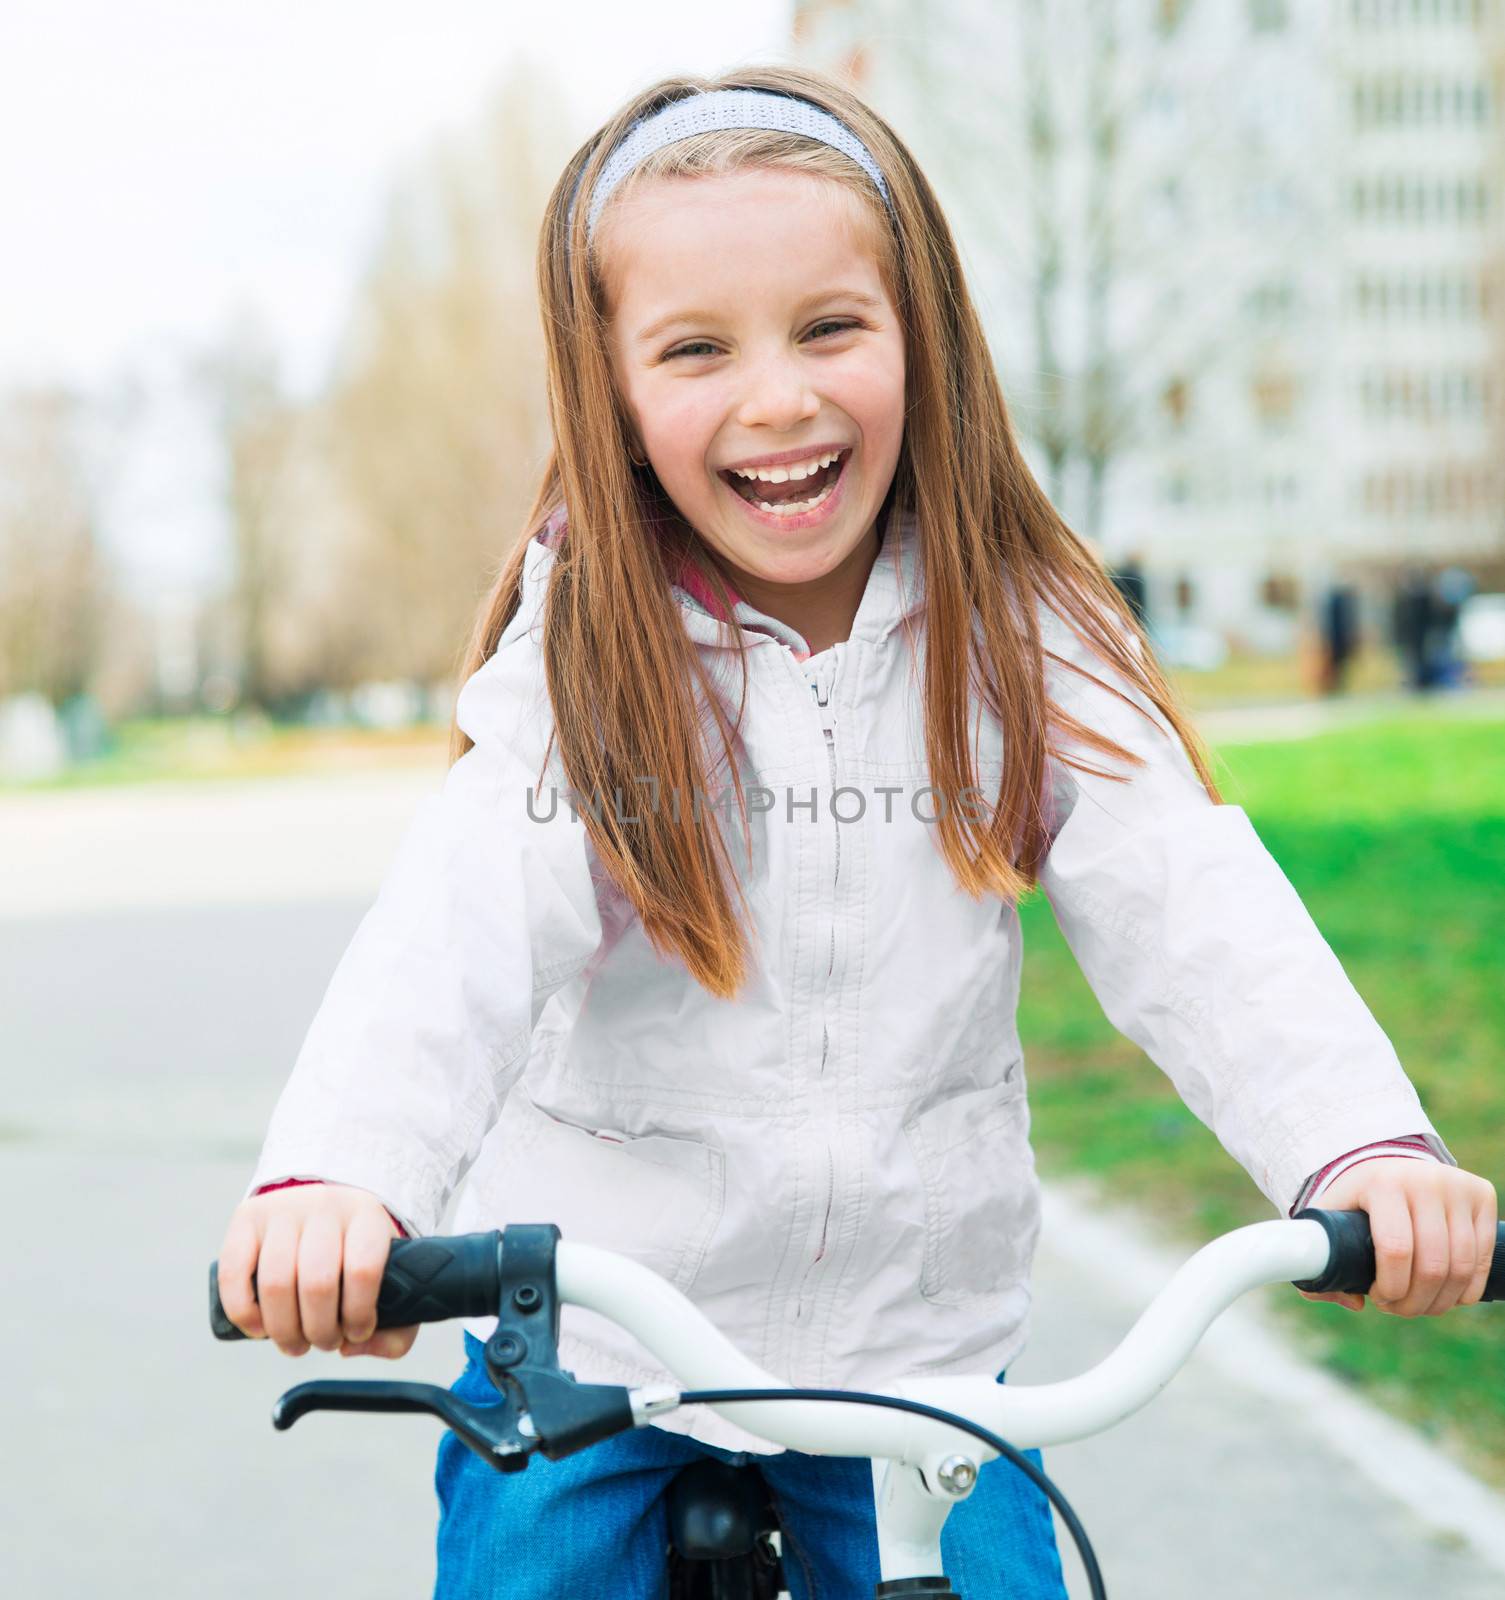 Portrait of a little smiling girl on a bicycle in summer park outdoors